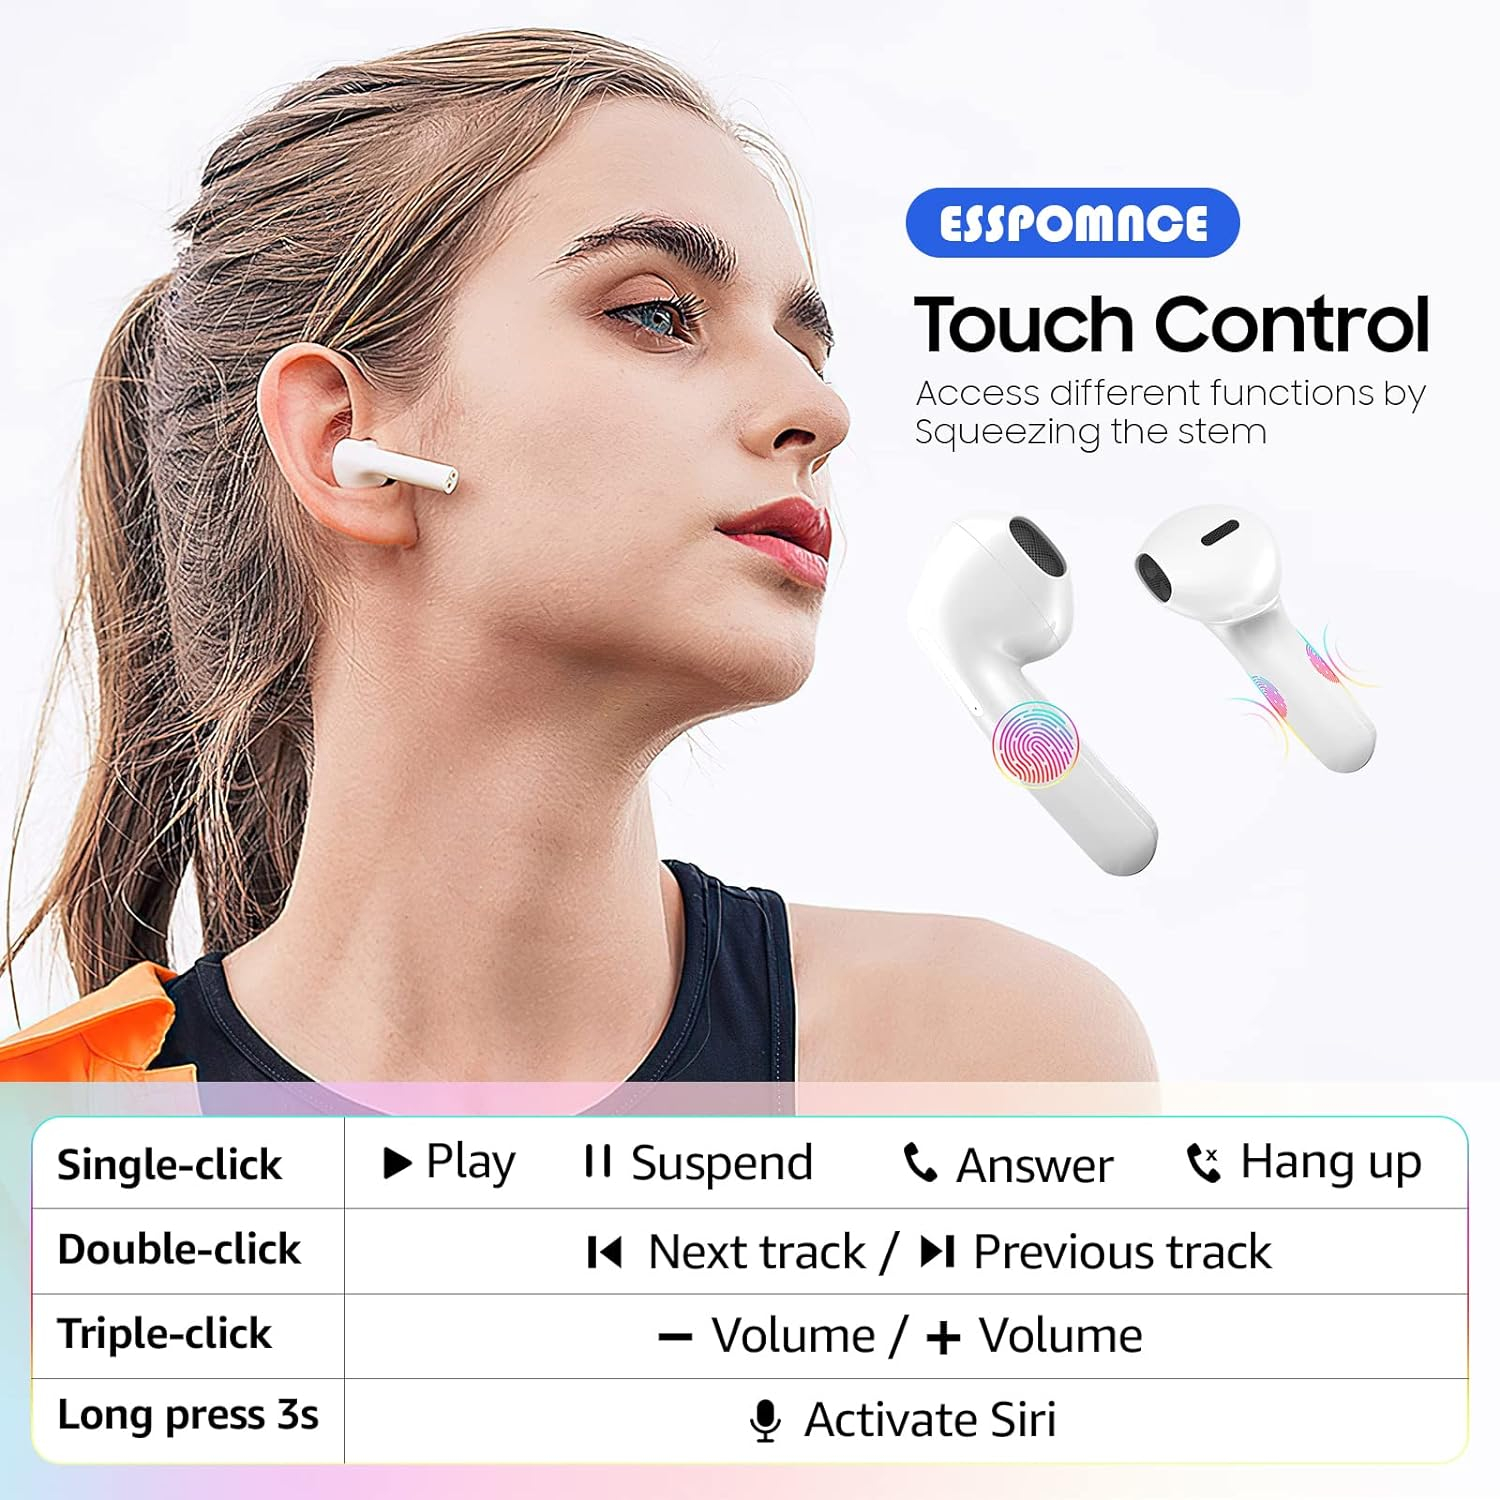 Wireless Earbuds Bluetooth 5.0 Headphones with Wireless Charging Case 36H Play Time, IPX6 Waterproof Earphones True Wireless Earbuds with Microphone, In-Ear Earbuds Deep Bass For Sports TV Phones